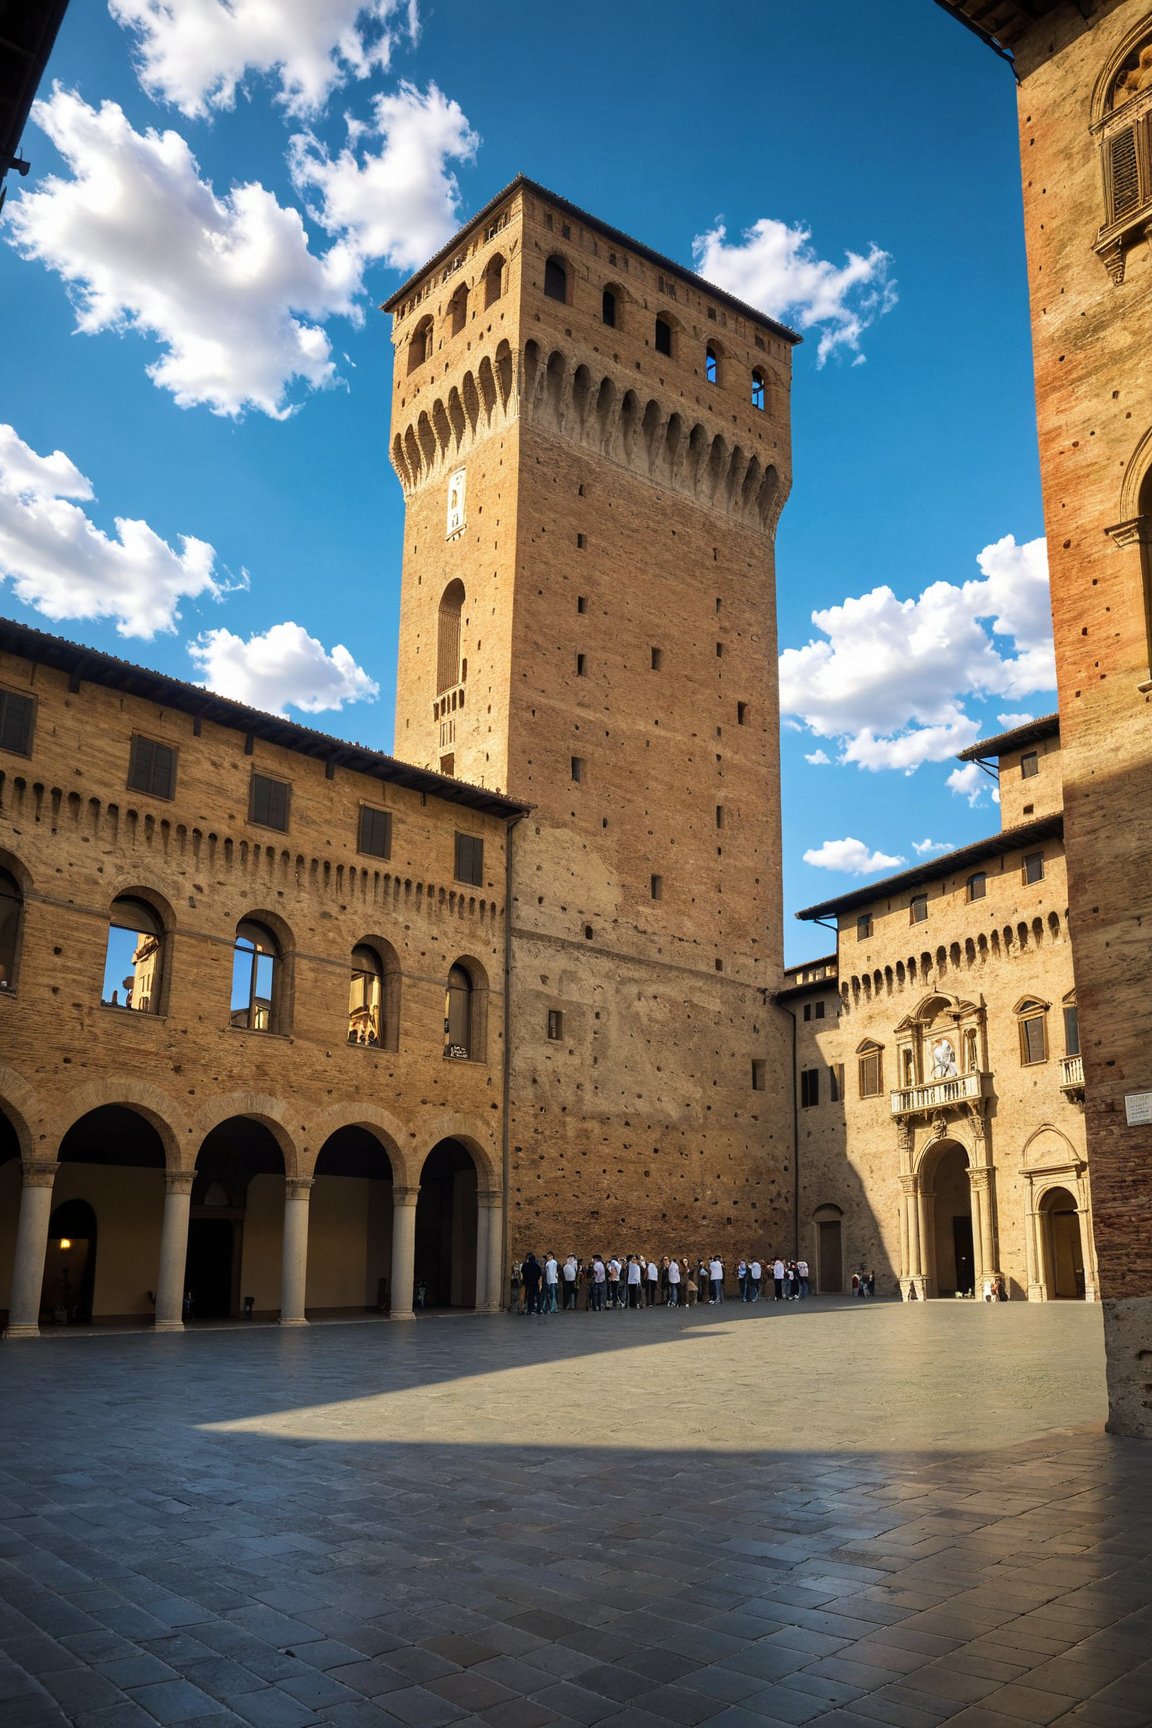 (Documentary photograph:1.3) of (Palazzo Vecchio in Florence:1.4), 14th century, (golden ratio:1.3), (medieval architecture:1.3), (mullioned windows:1.3),(brick wall:1.1), (tower with merlons:1.2), (overlooking the Piazza della Signoria:1.2), beautiful blue sky with imposing cumulonembus clouds, BREAK shot on Canon EOS 5D, from below, Fujicolor Pro film, in the style of Miko Lagerstedt/Liam Wong/Nan Goldin/Lee Friedlander, (photorealistic:1.3), (soft diffused lighting:1.2), vignette, highest quality, original shot. BREAK Front view, well-lit, (perfect focus:1.2), award winning, detailed and intricate, masterpiece, itacstl,real_booster,itacstl